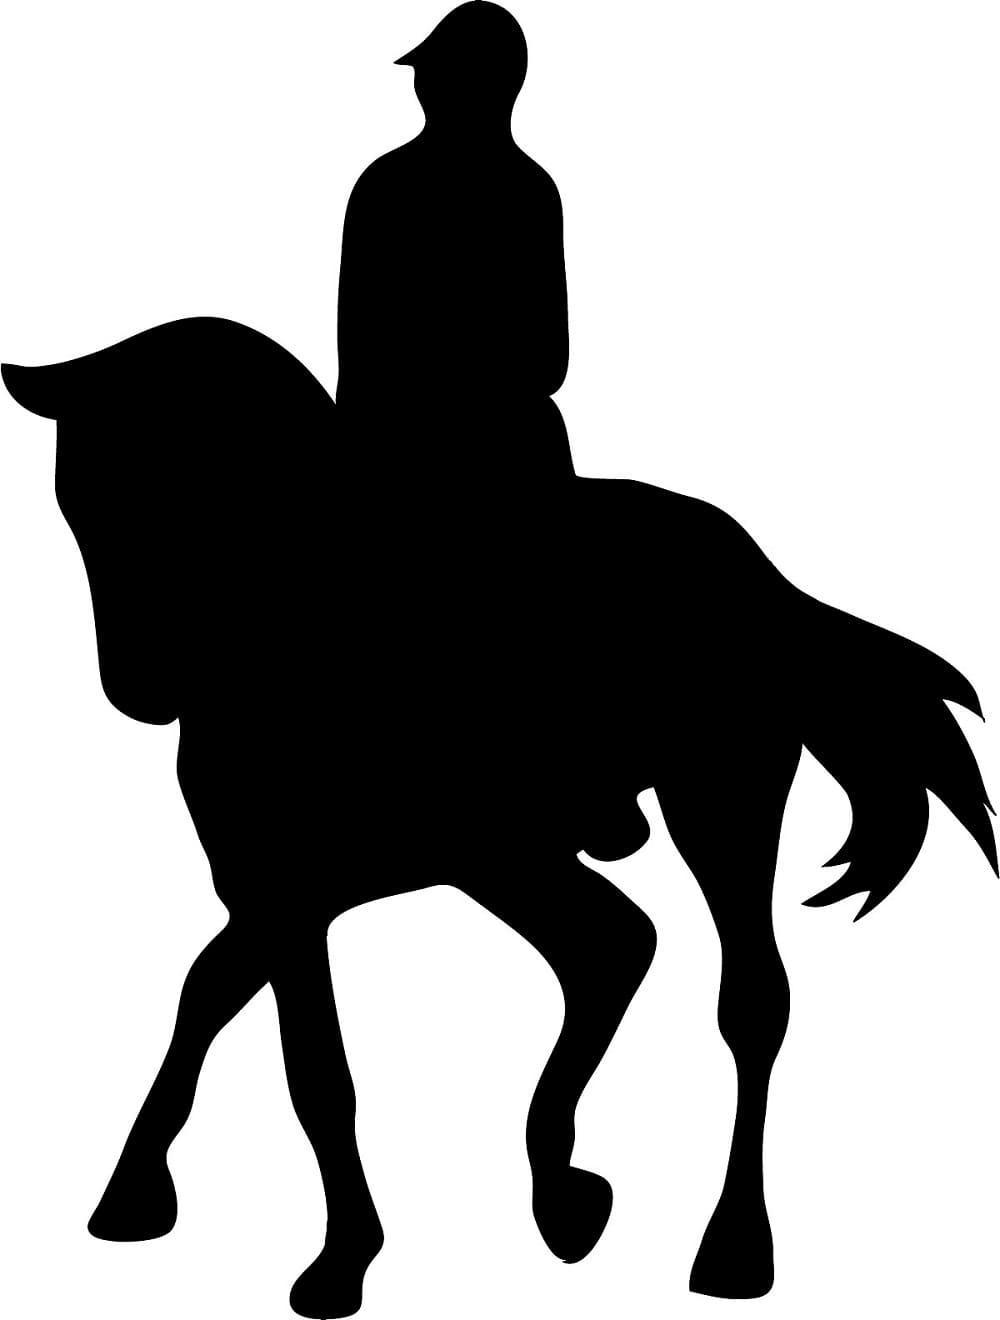 Printable Image of Horse Stencil